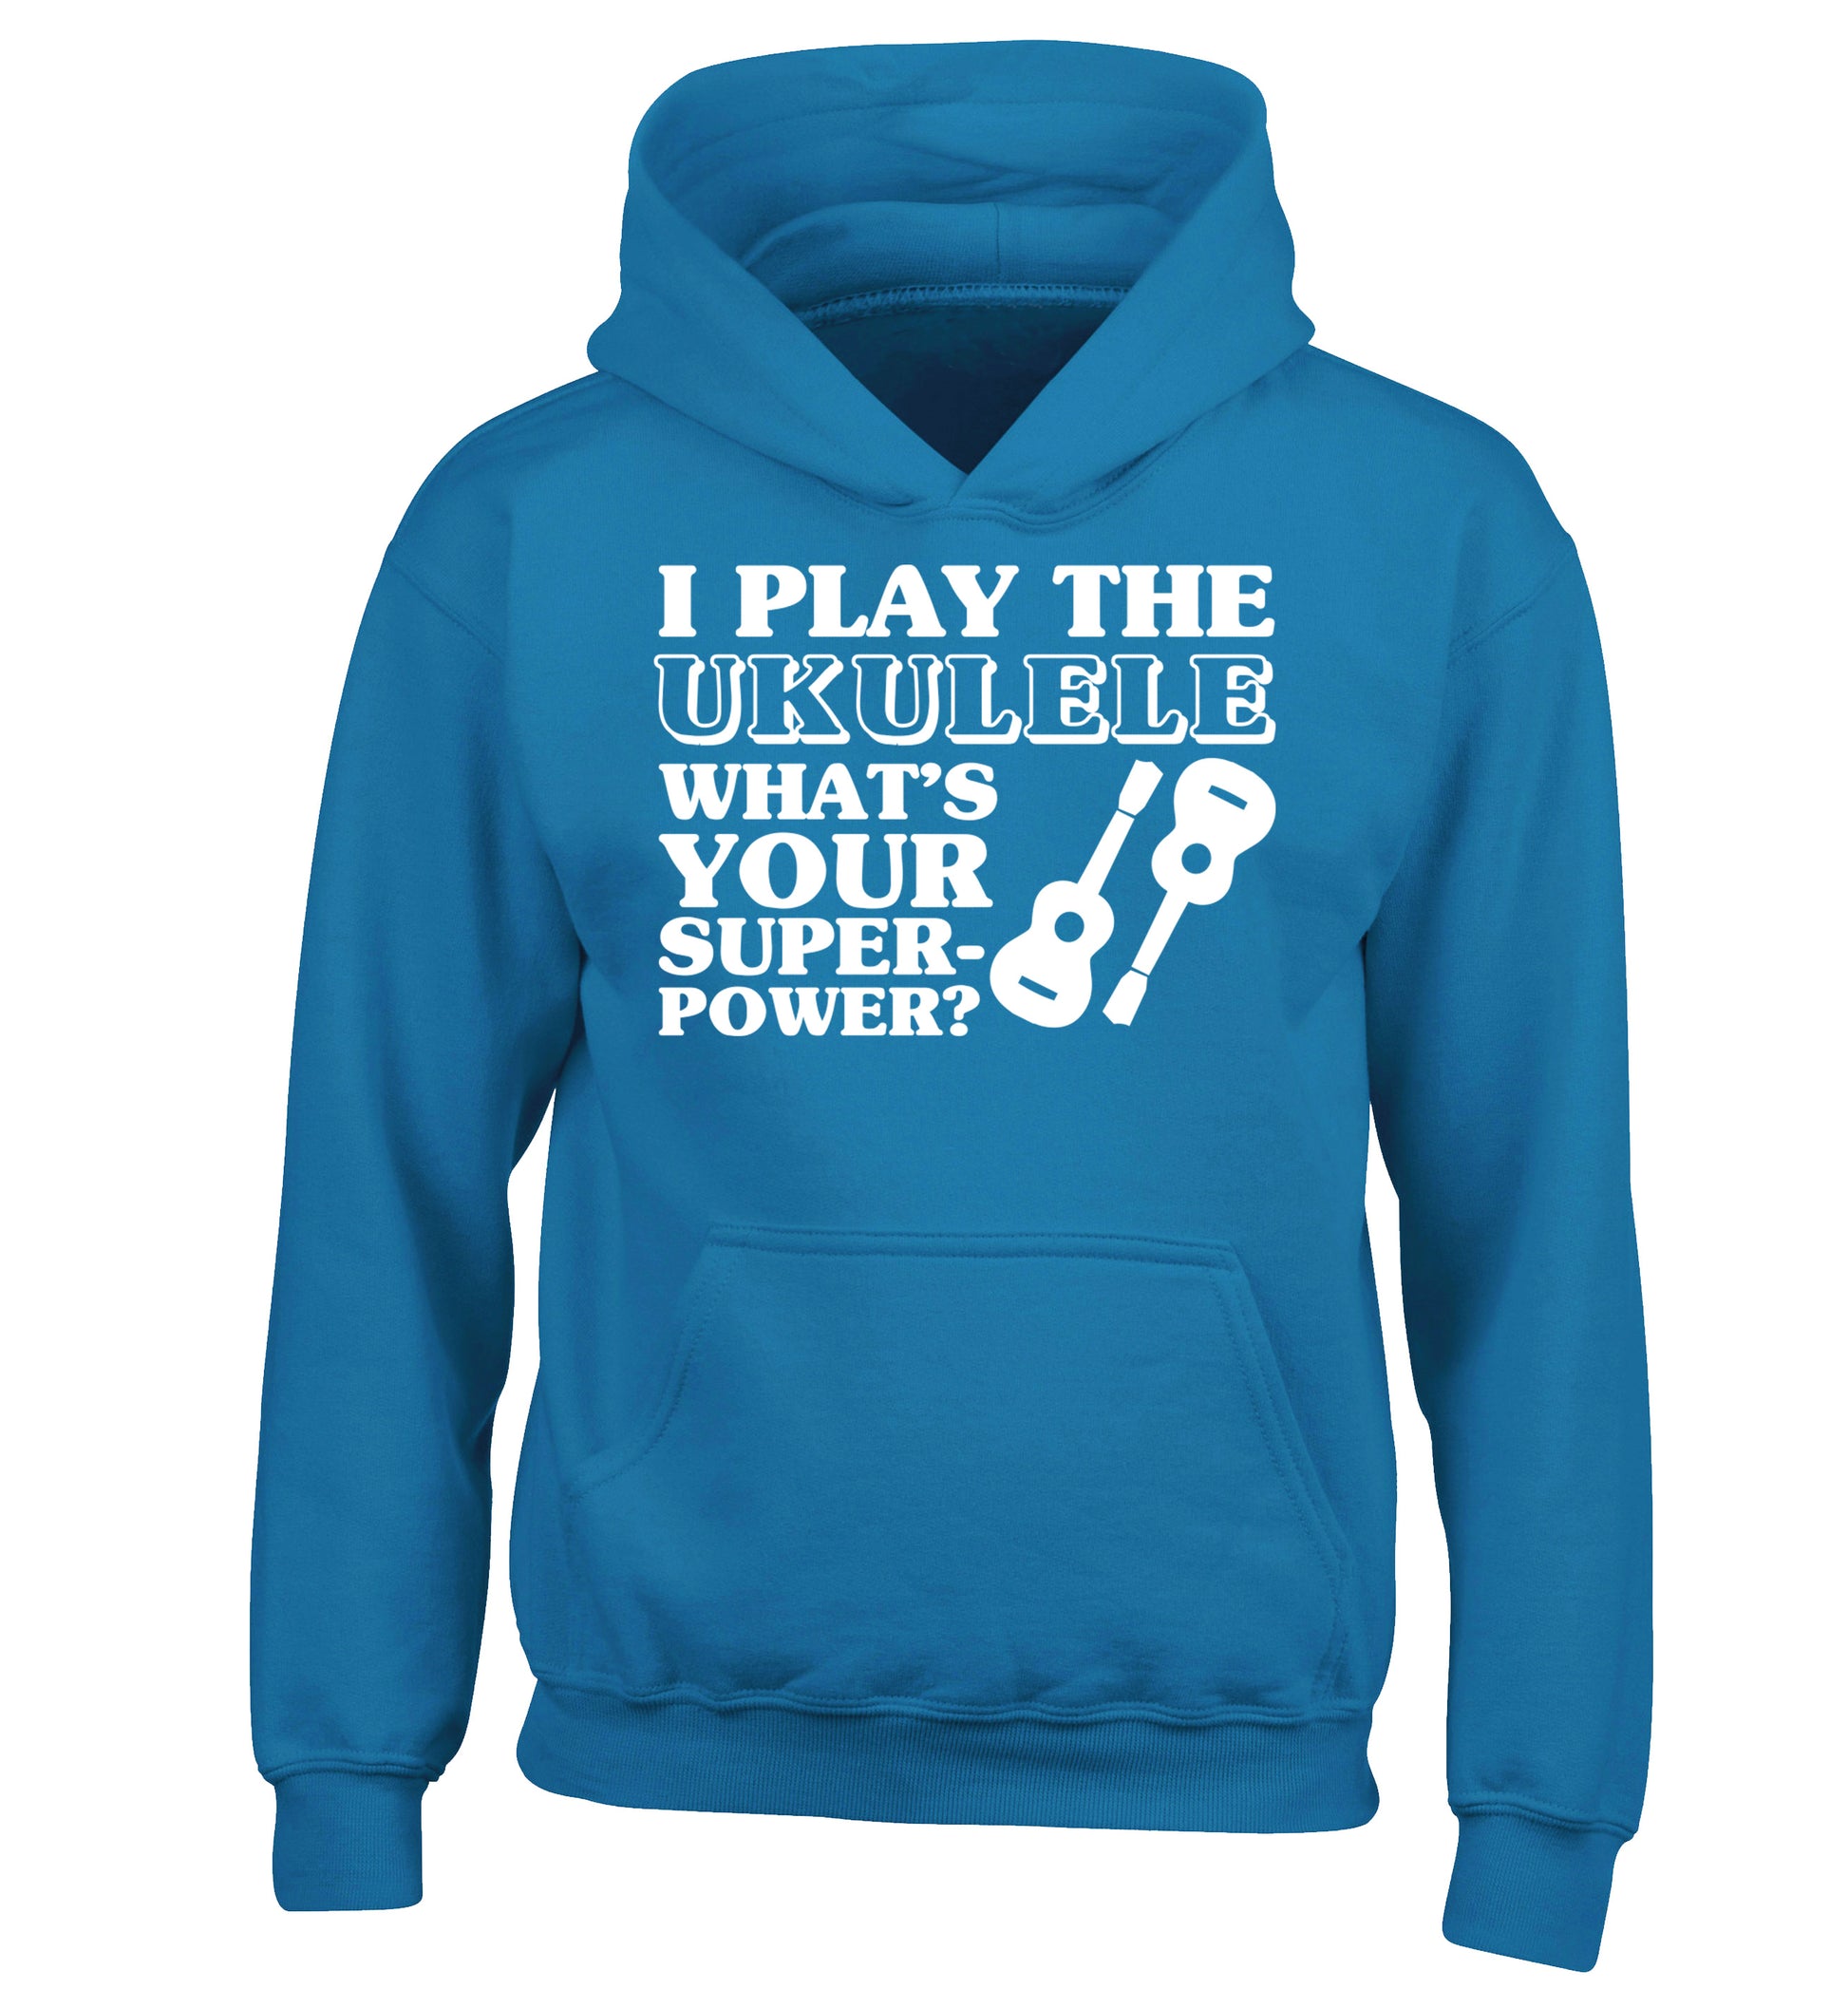 I play the ukulele what's your superpower? children's blue hoodie 12-14 Years